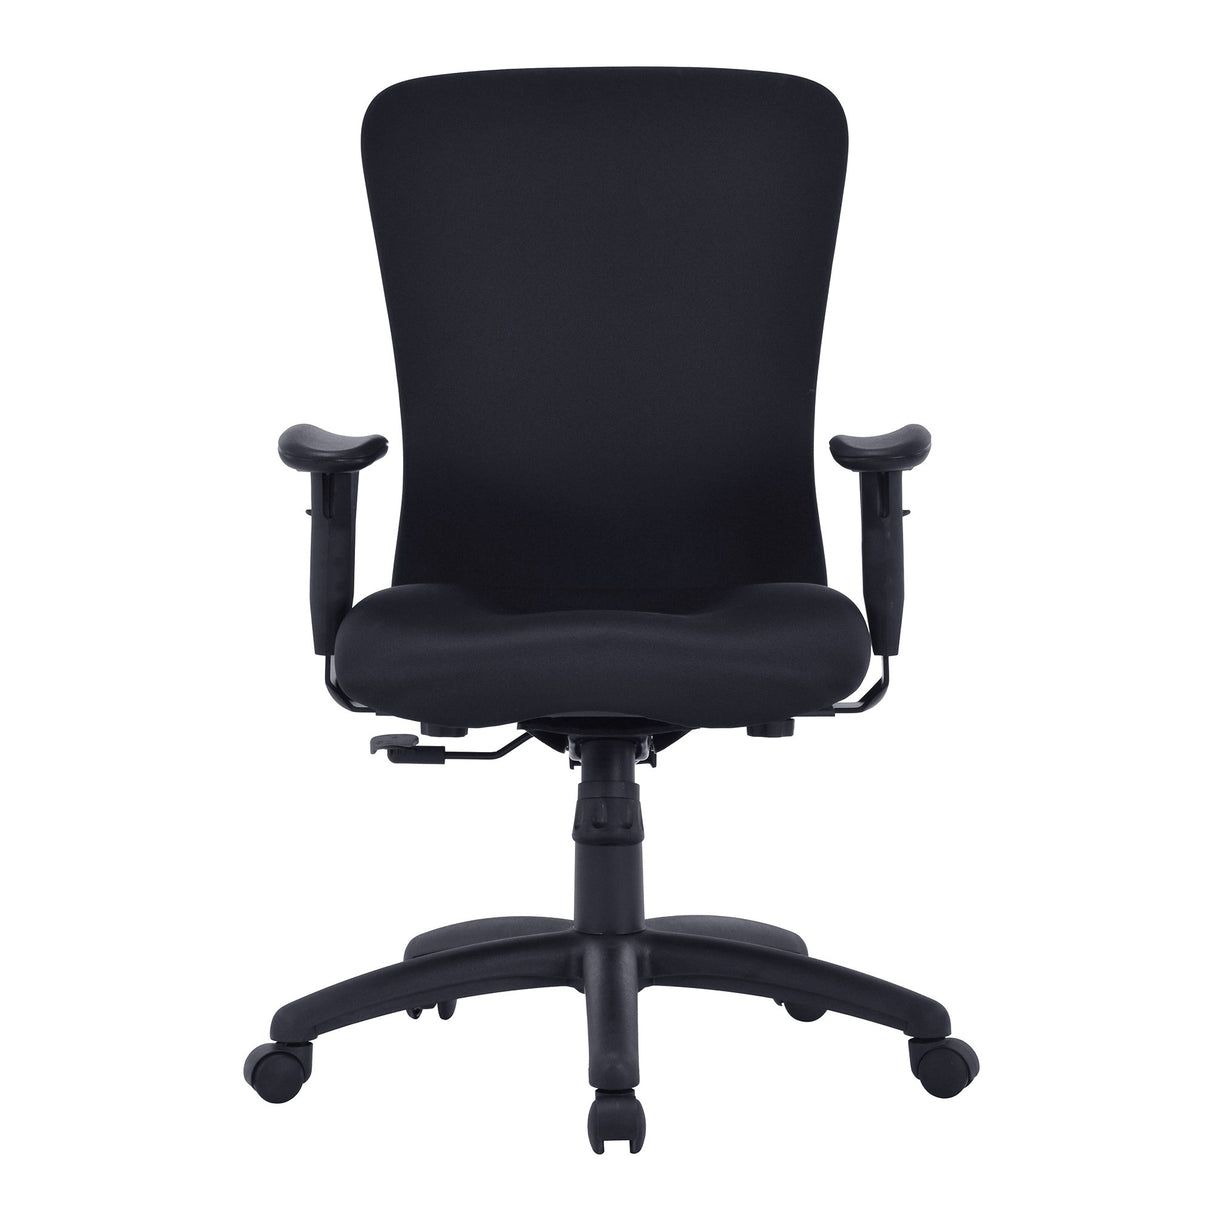 Nautilus Designs Fortis Bariatric Task/Manager Chair with Integrated Lumbar Support - Black